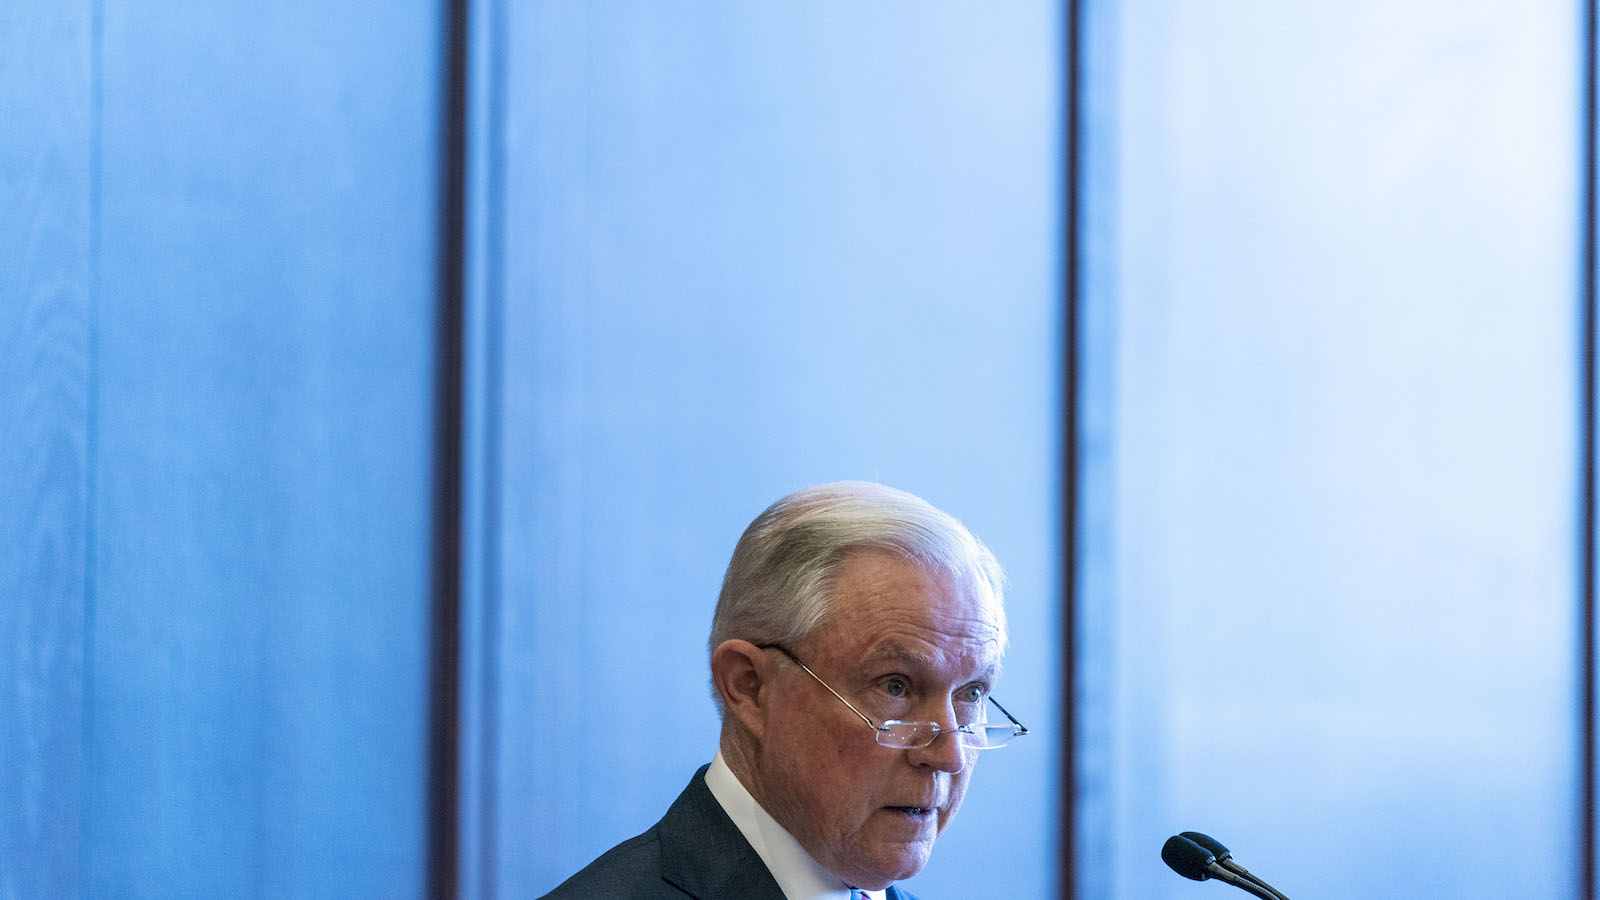 Bribery Trial Reveals Jeff Sessions Role In Blocking Epa Action